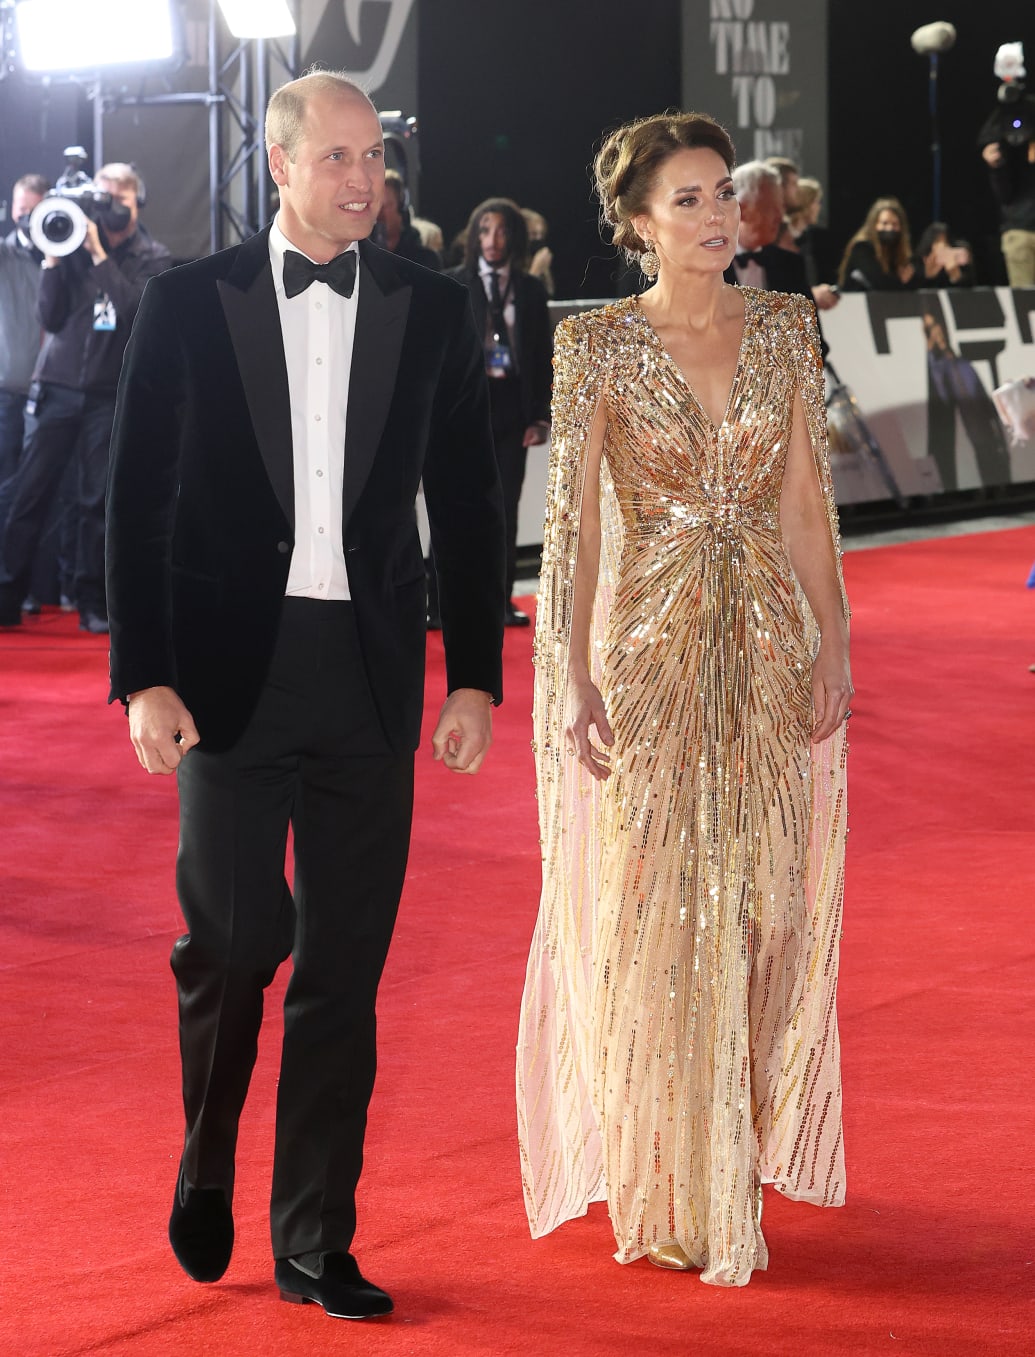 James Bond film premiere: Kate Middleton and other stars line the red carpet